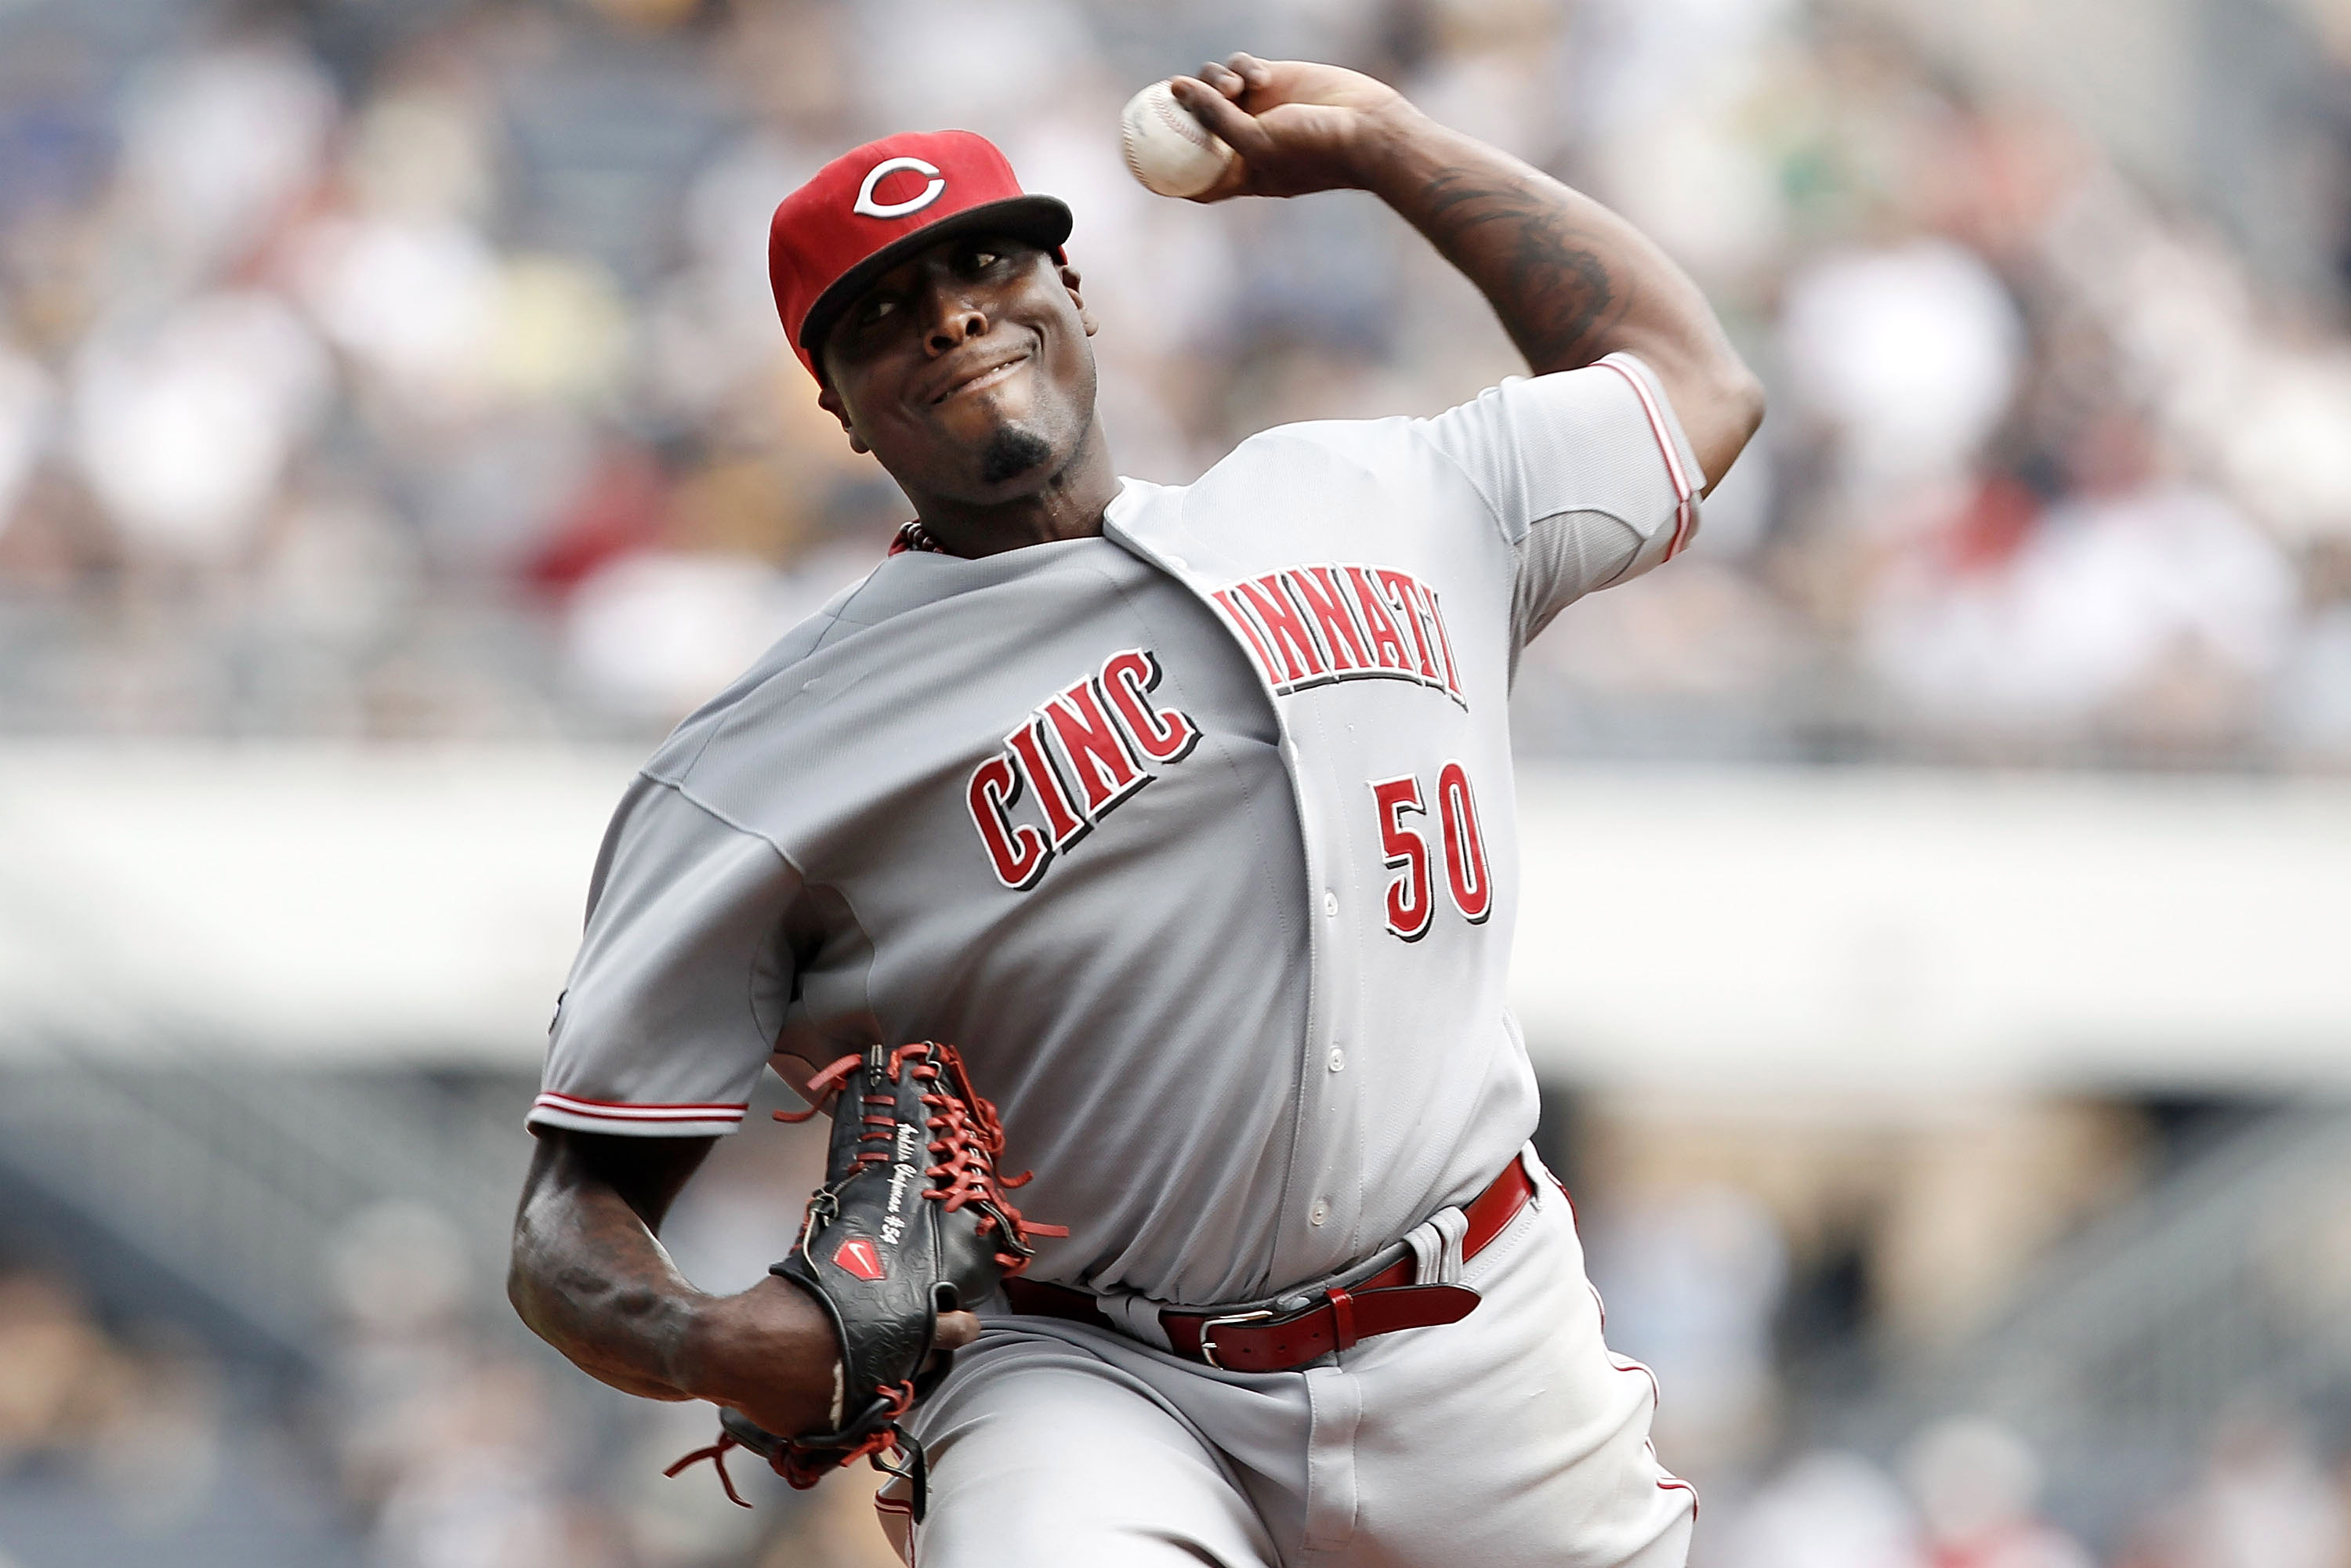 Dontrelle Willis' top 5 starting pitchers in baseball right now